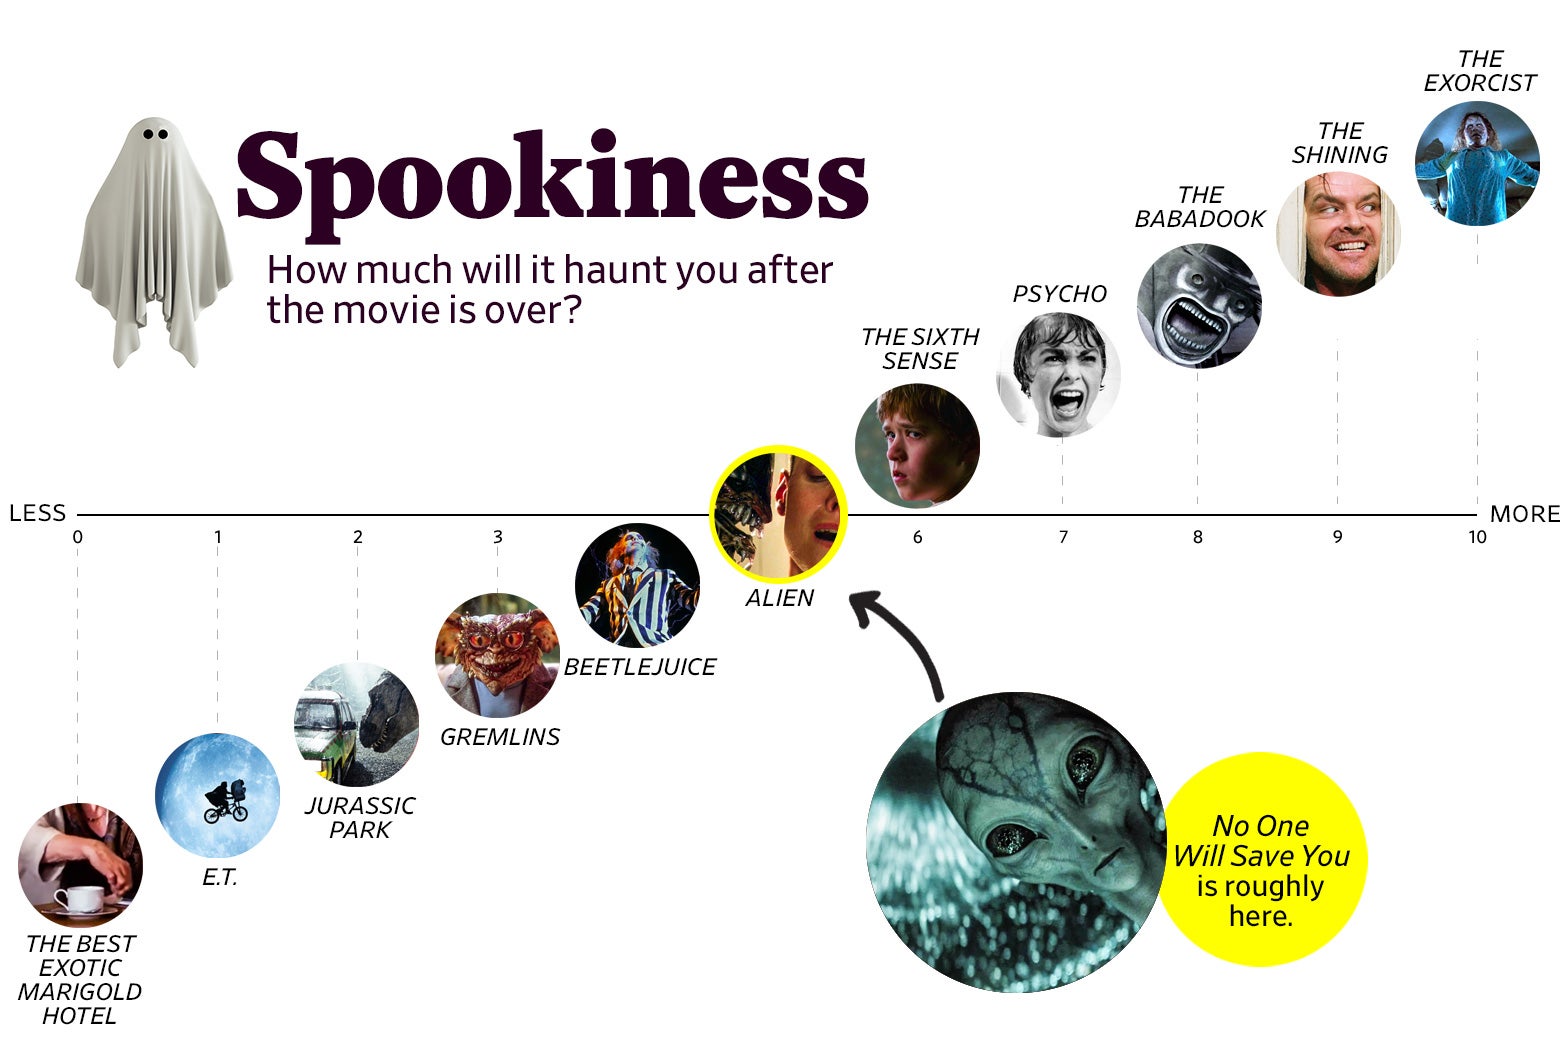 A chart titled “Spookiness: How much will it haunt you after the movie is over?” shows that No One Will Save You ranks a 5 in spookiness, roughly the same as Alien. The scale ranges from The Best Exotic Marigold Hotel (0) to The Exorcist (10).